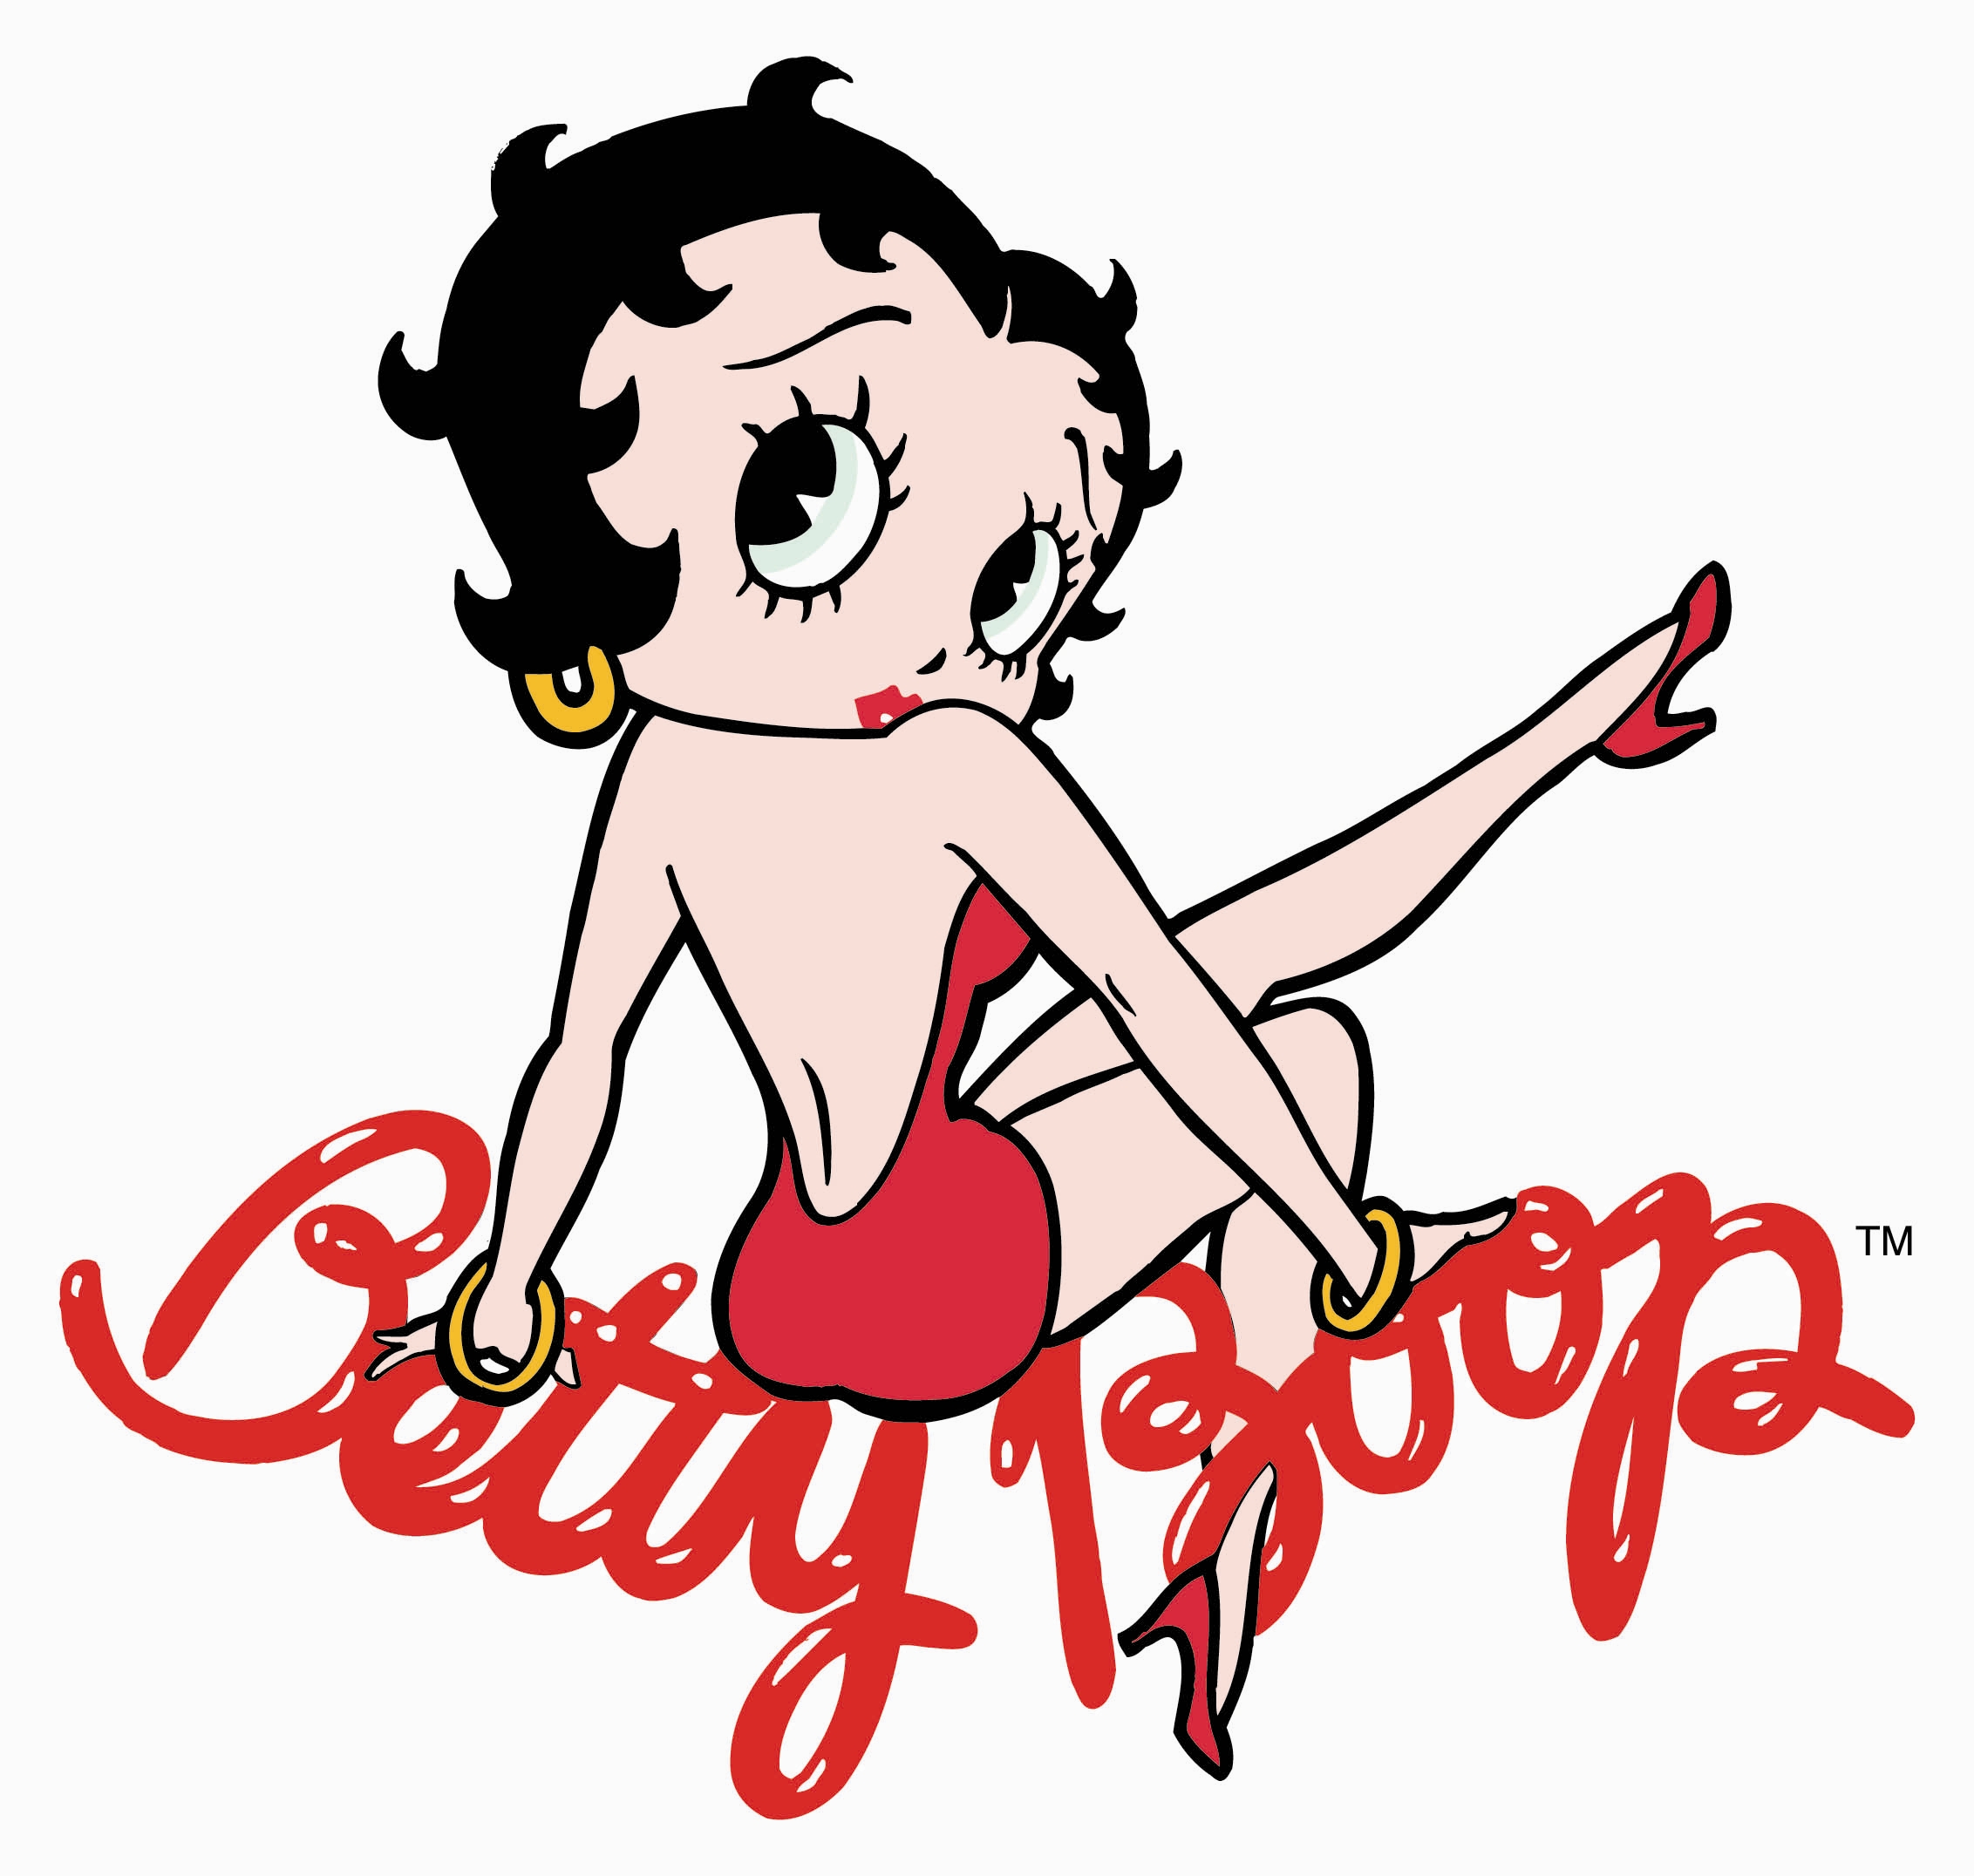 Nice Images Collection: Betty Boop Desktop Wallpapers